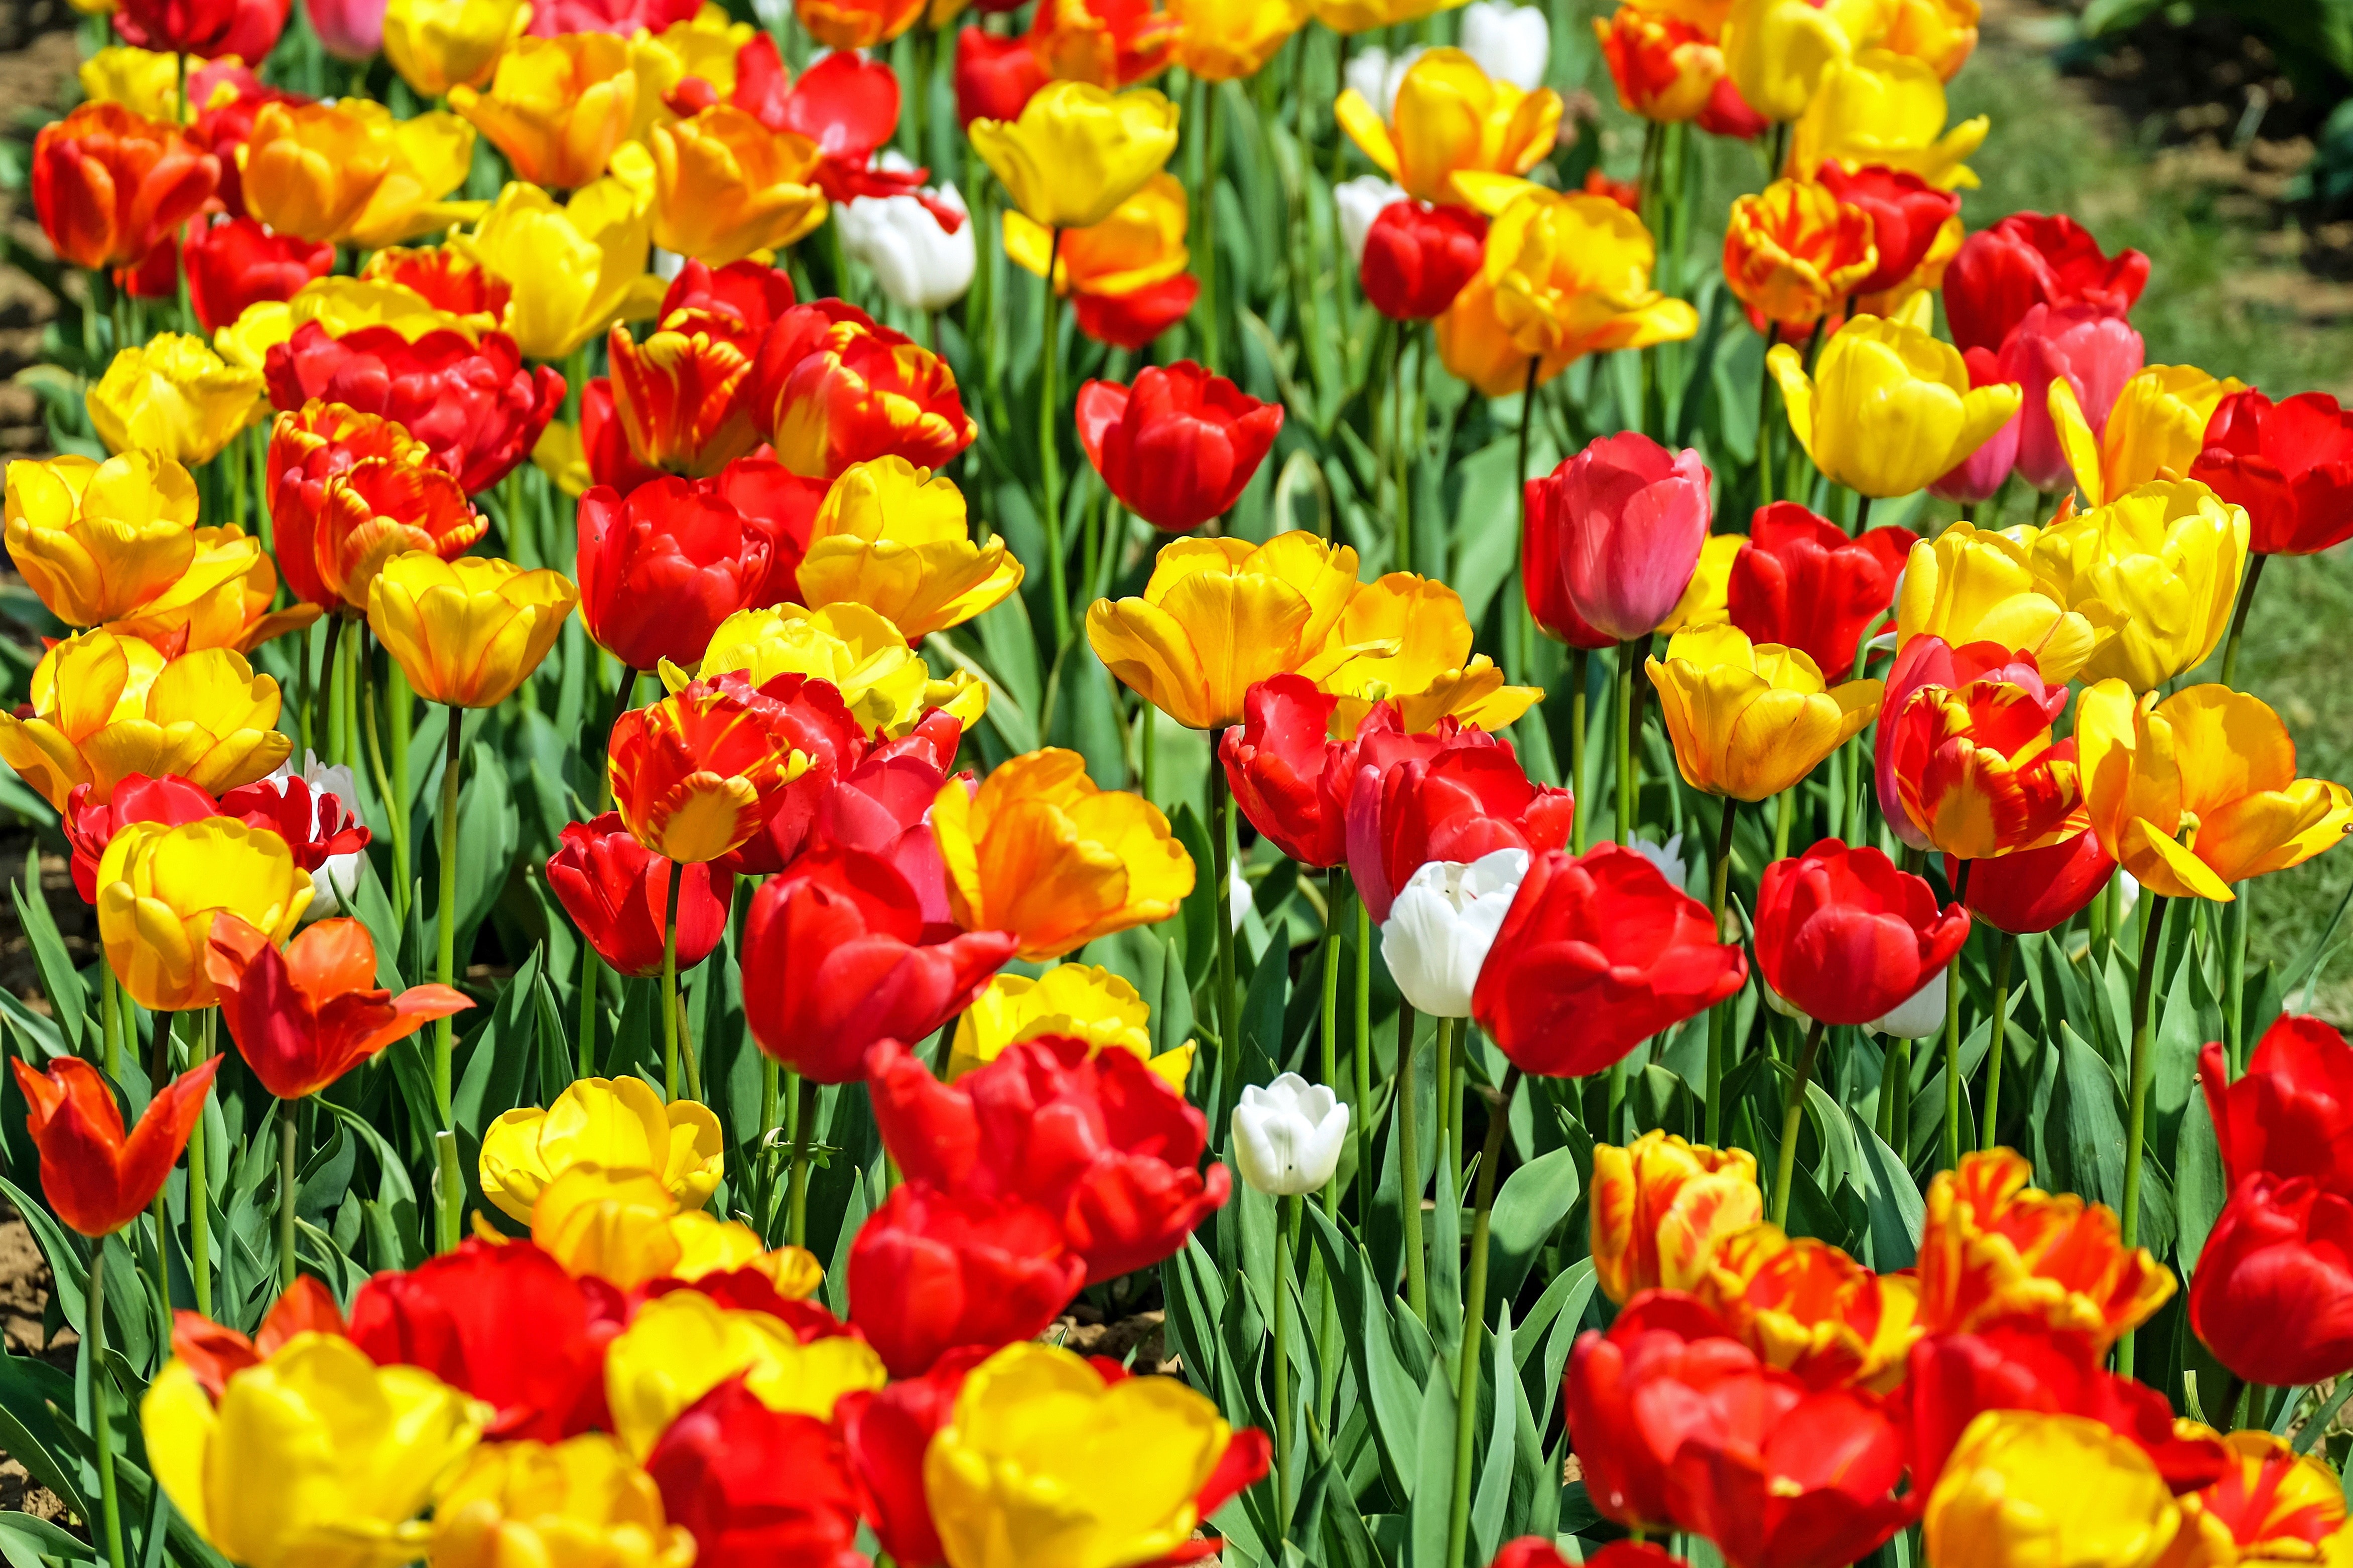 red and yellow petaled flowers